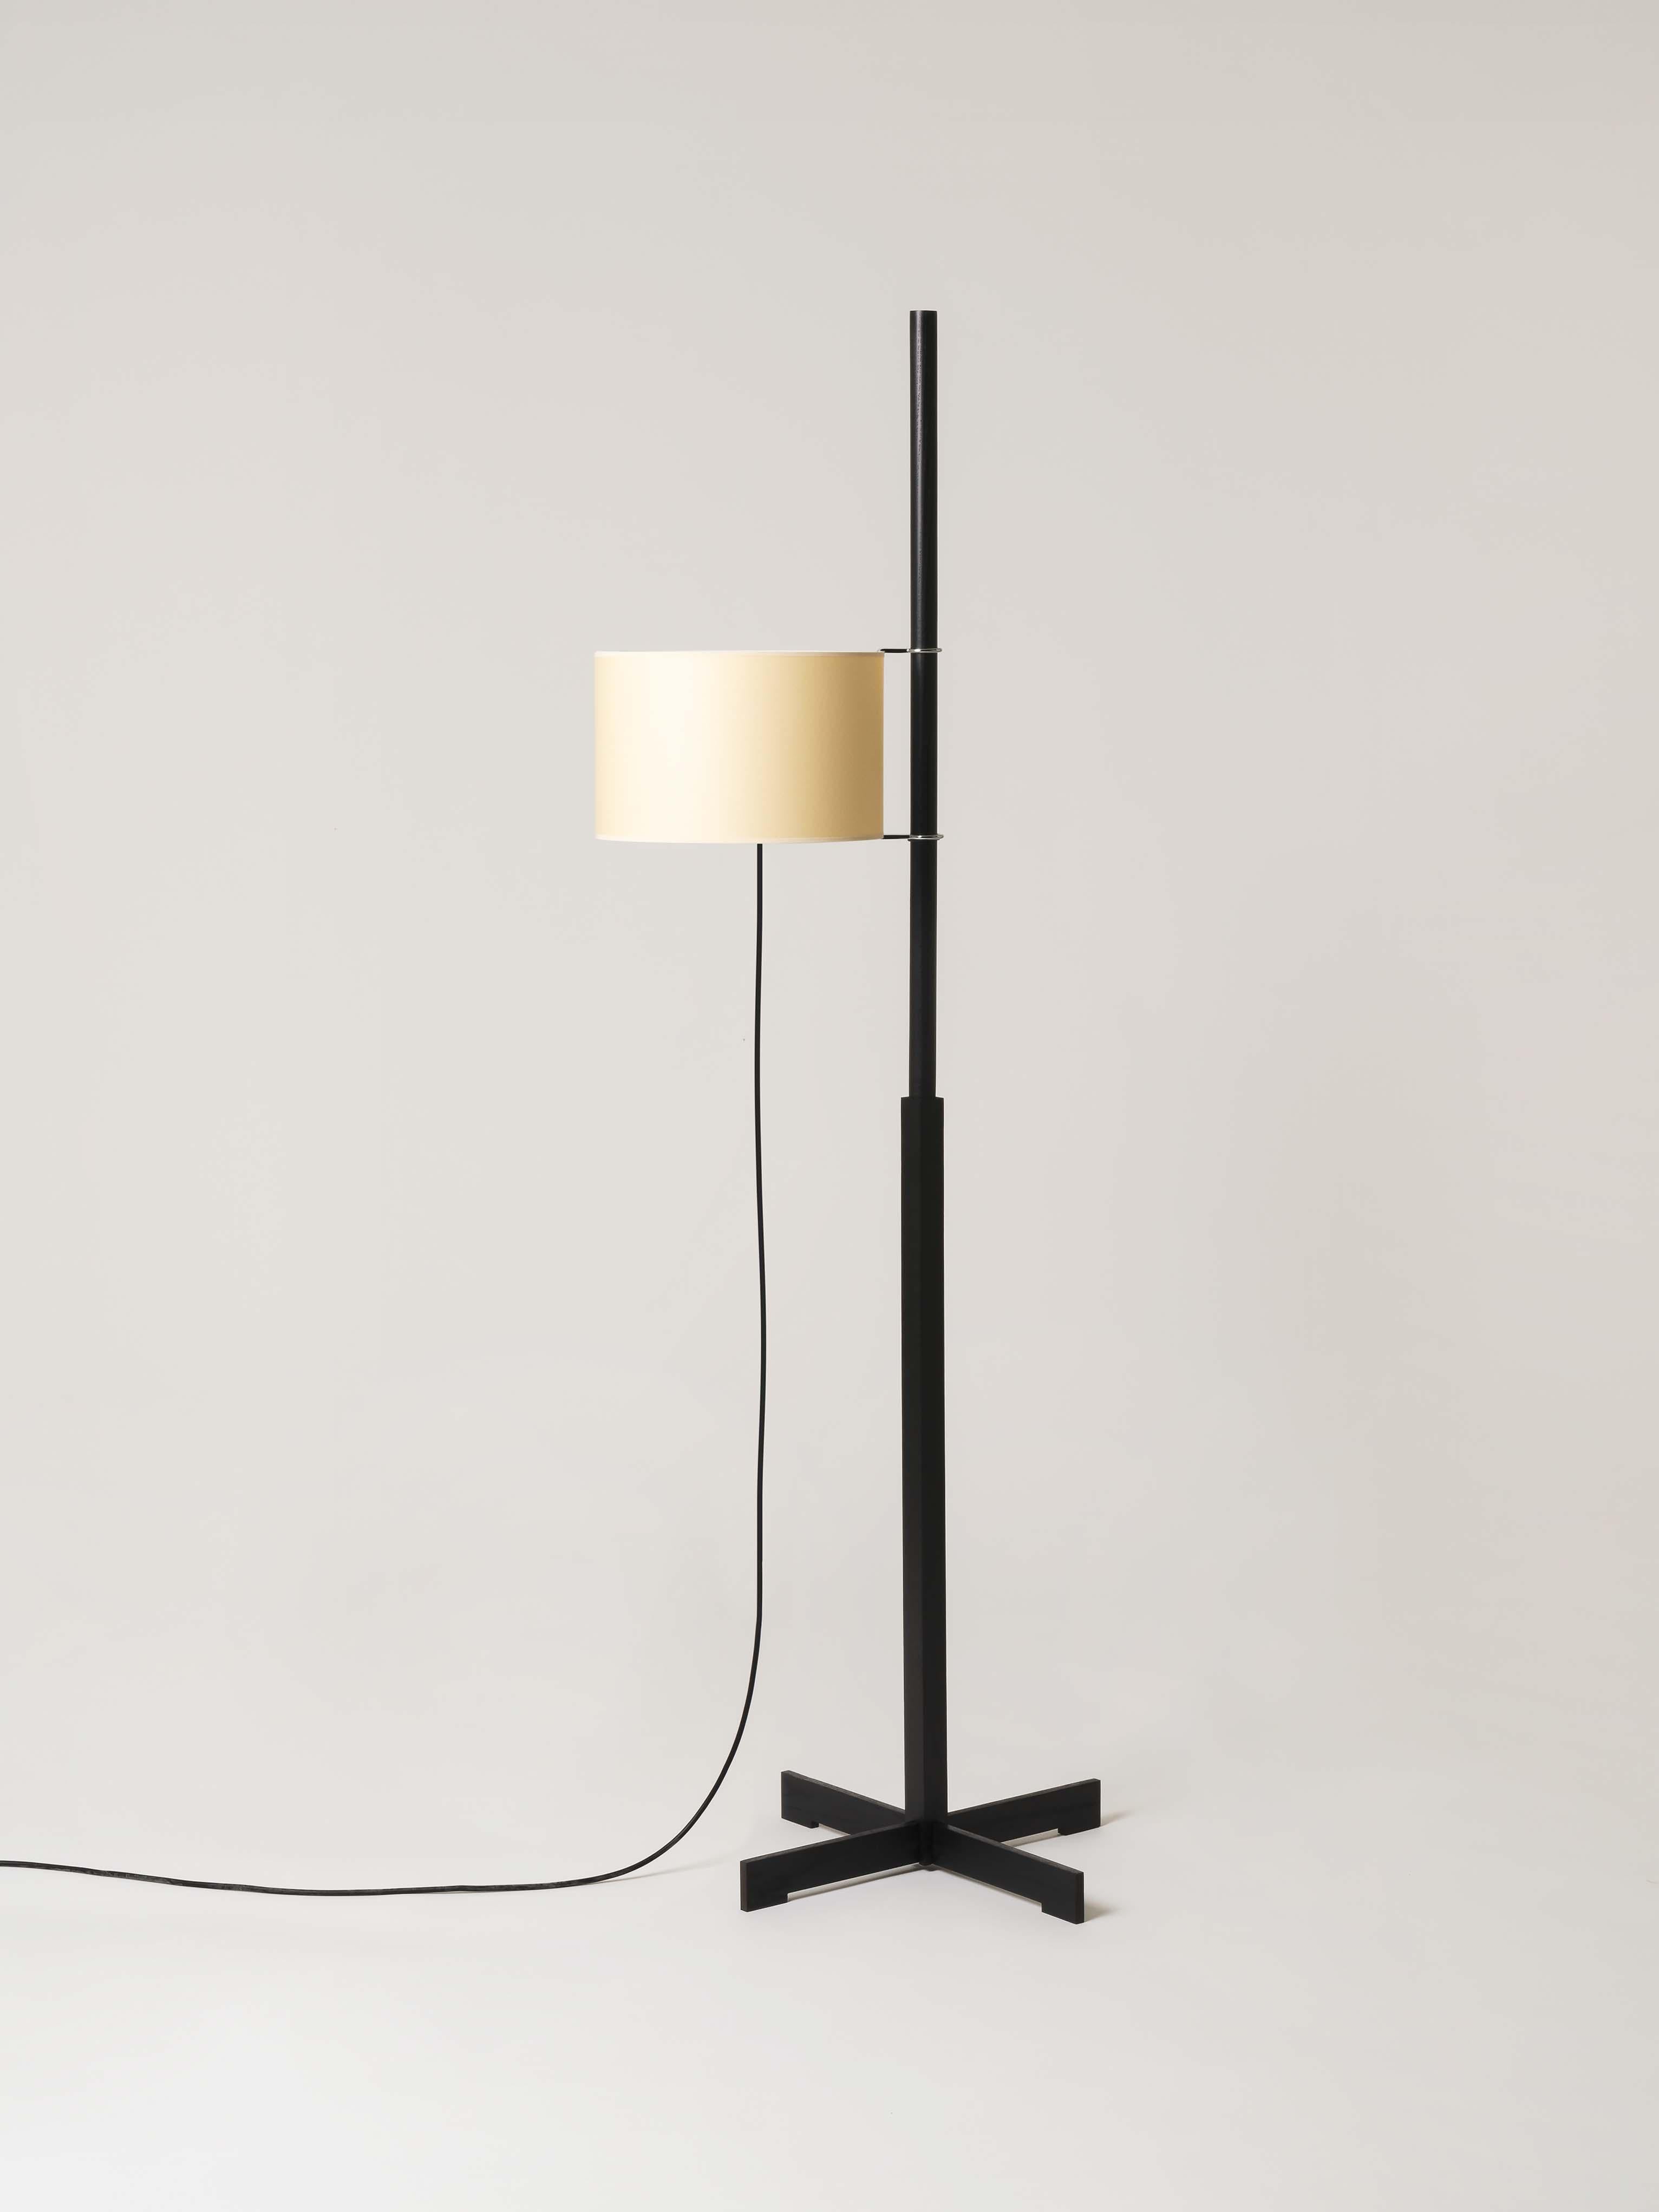 Beige and black oak TMM floor lamp by Miguel Milá.
Dimensions: D 50 x W 60 x H 166 cm.
Materials: Cherry wood, parchment lampshade.
Available in 3 lampshades: beige, white and white with diffuser.
Available in 5 woods: beech, cherry, walnut,